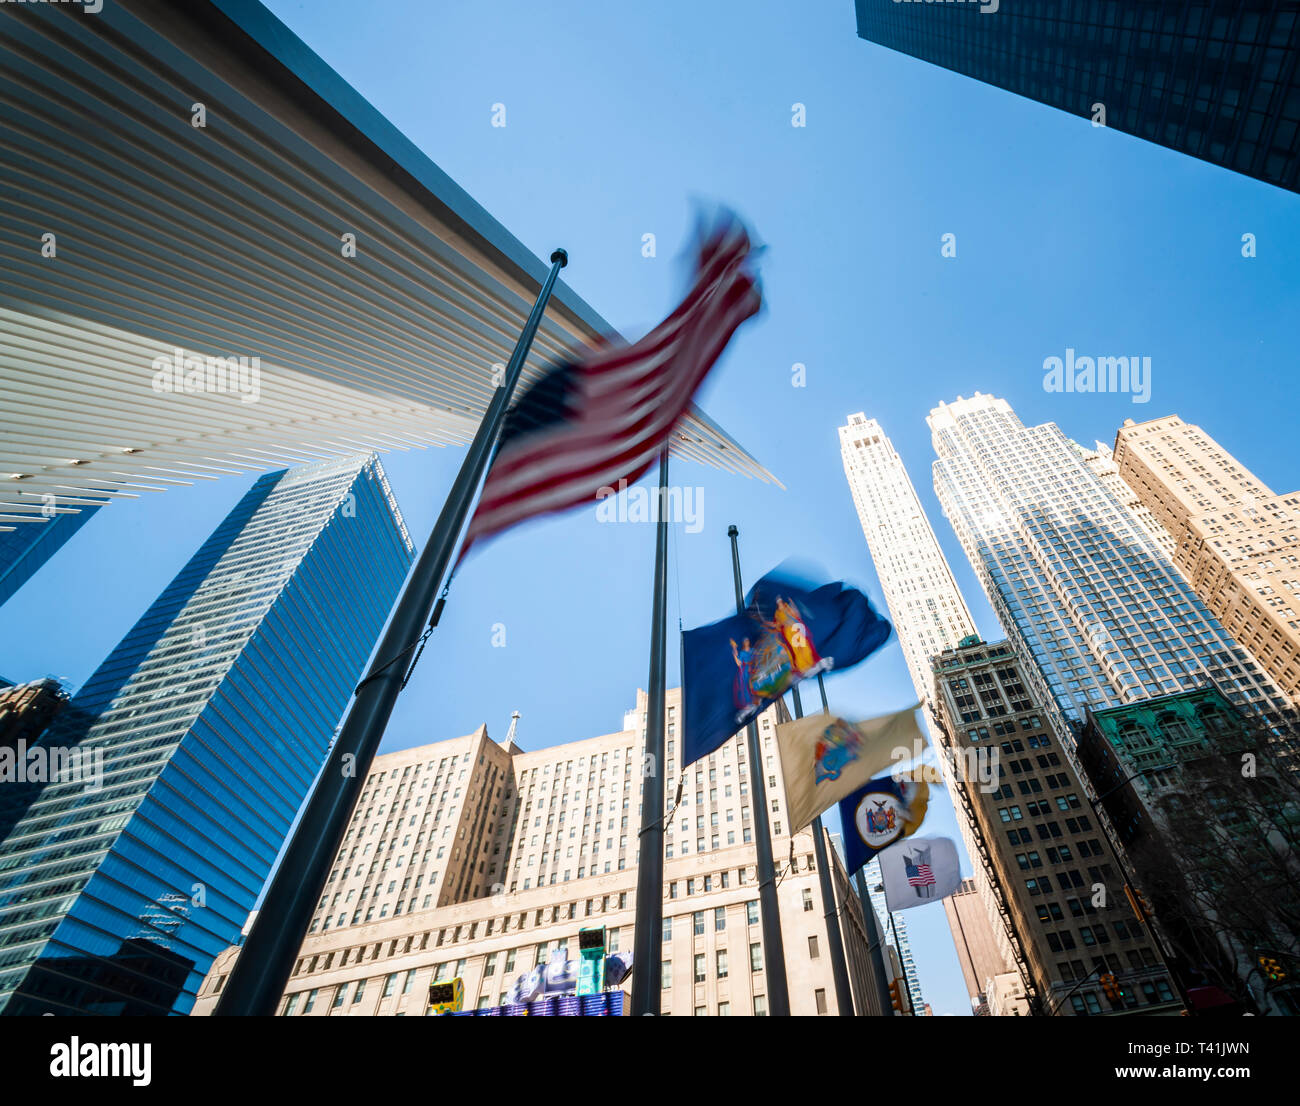 An American flag along with state, city and governmental agency flags are whipped around by the wind outside of the World Trade Center Transportation Hub in Lower Manhattan in New York on Wednesday, April 3, 2019. (Â© Richard B. Levine) Stock Photo